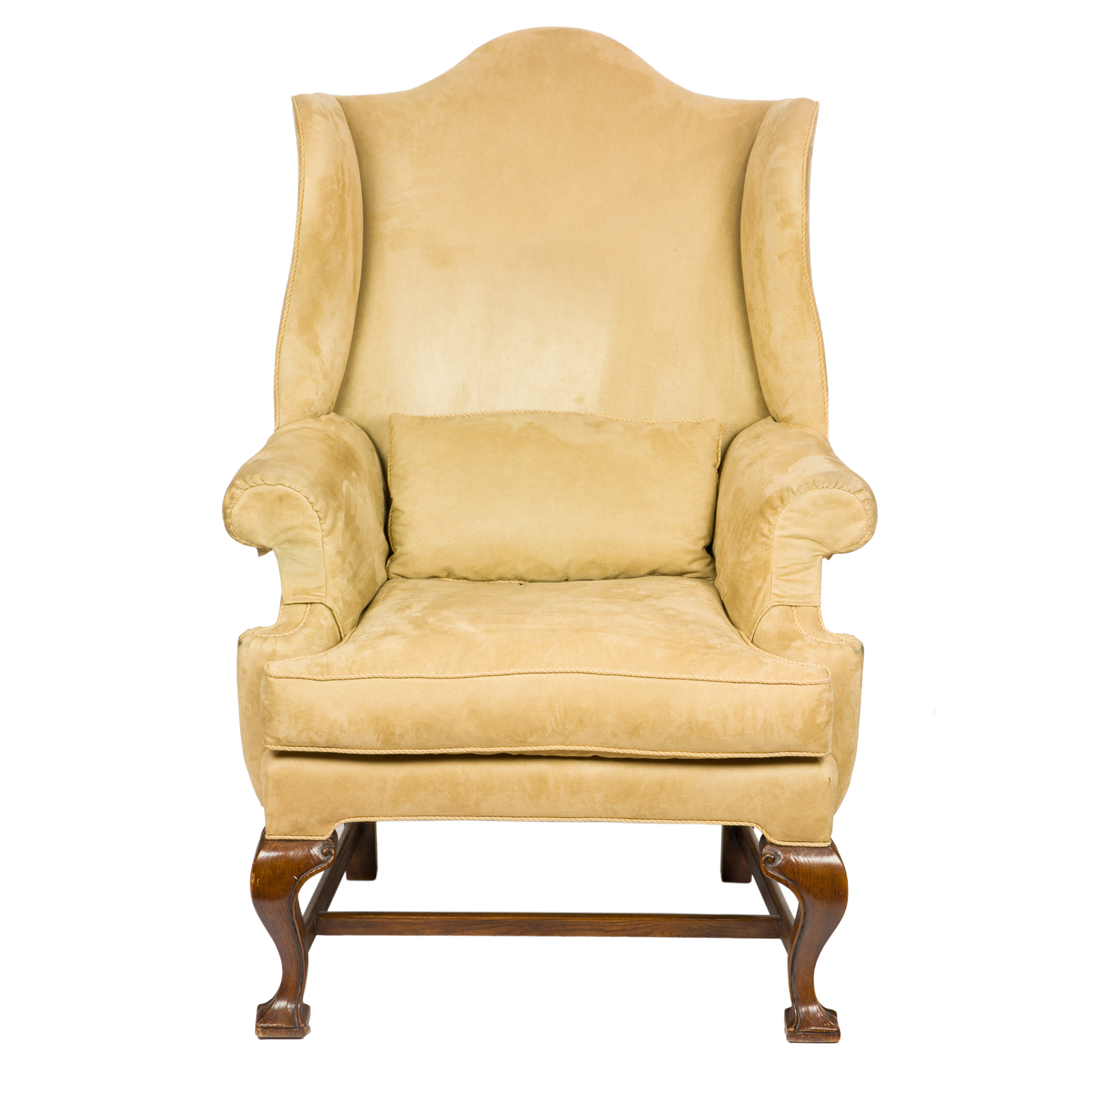 A QUEEN ANNE STYLE UPHOLSTERED 3a394d